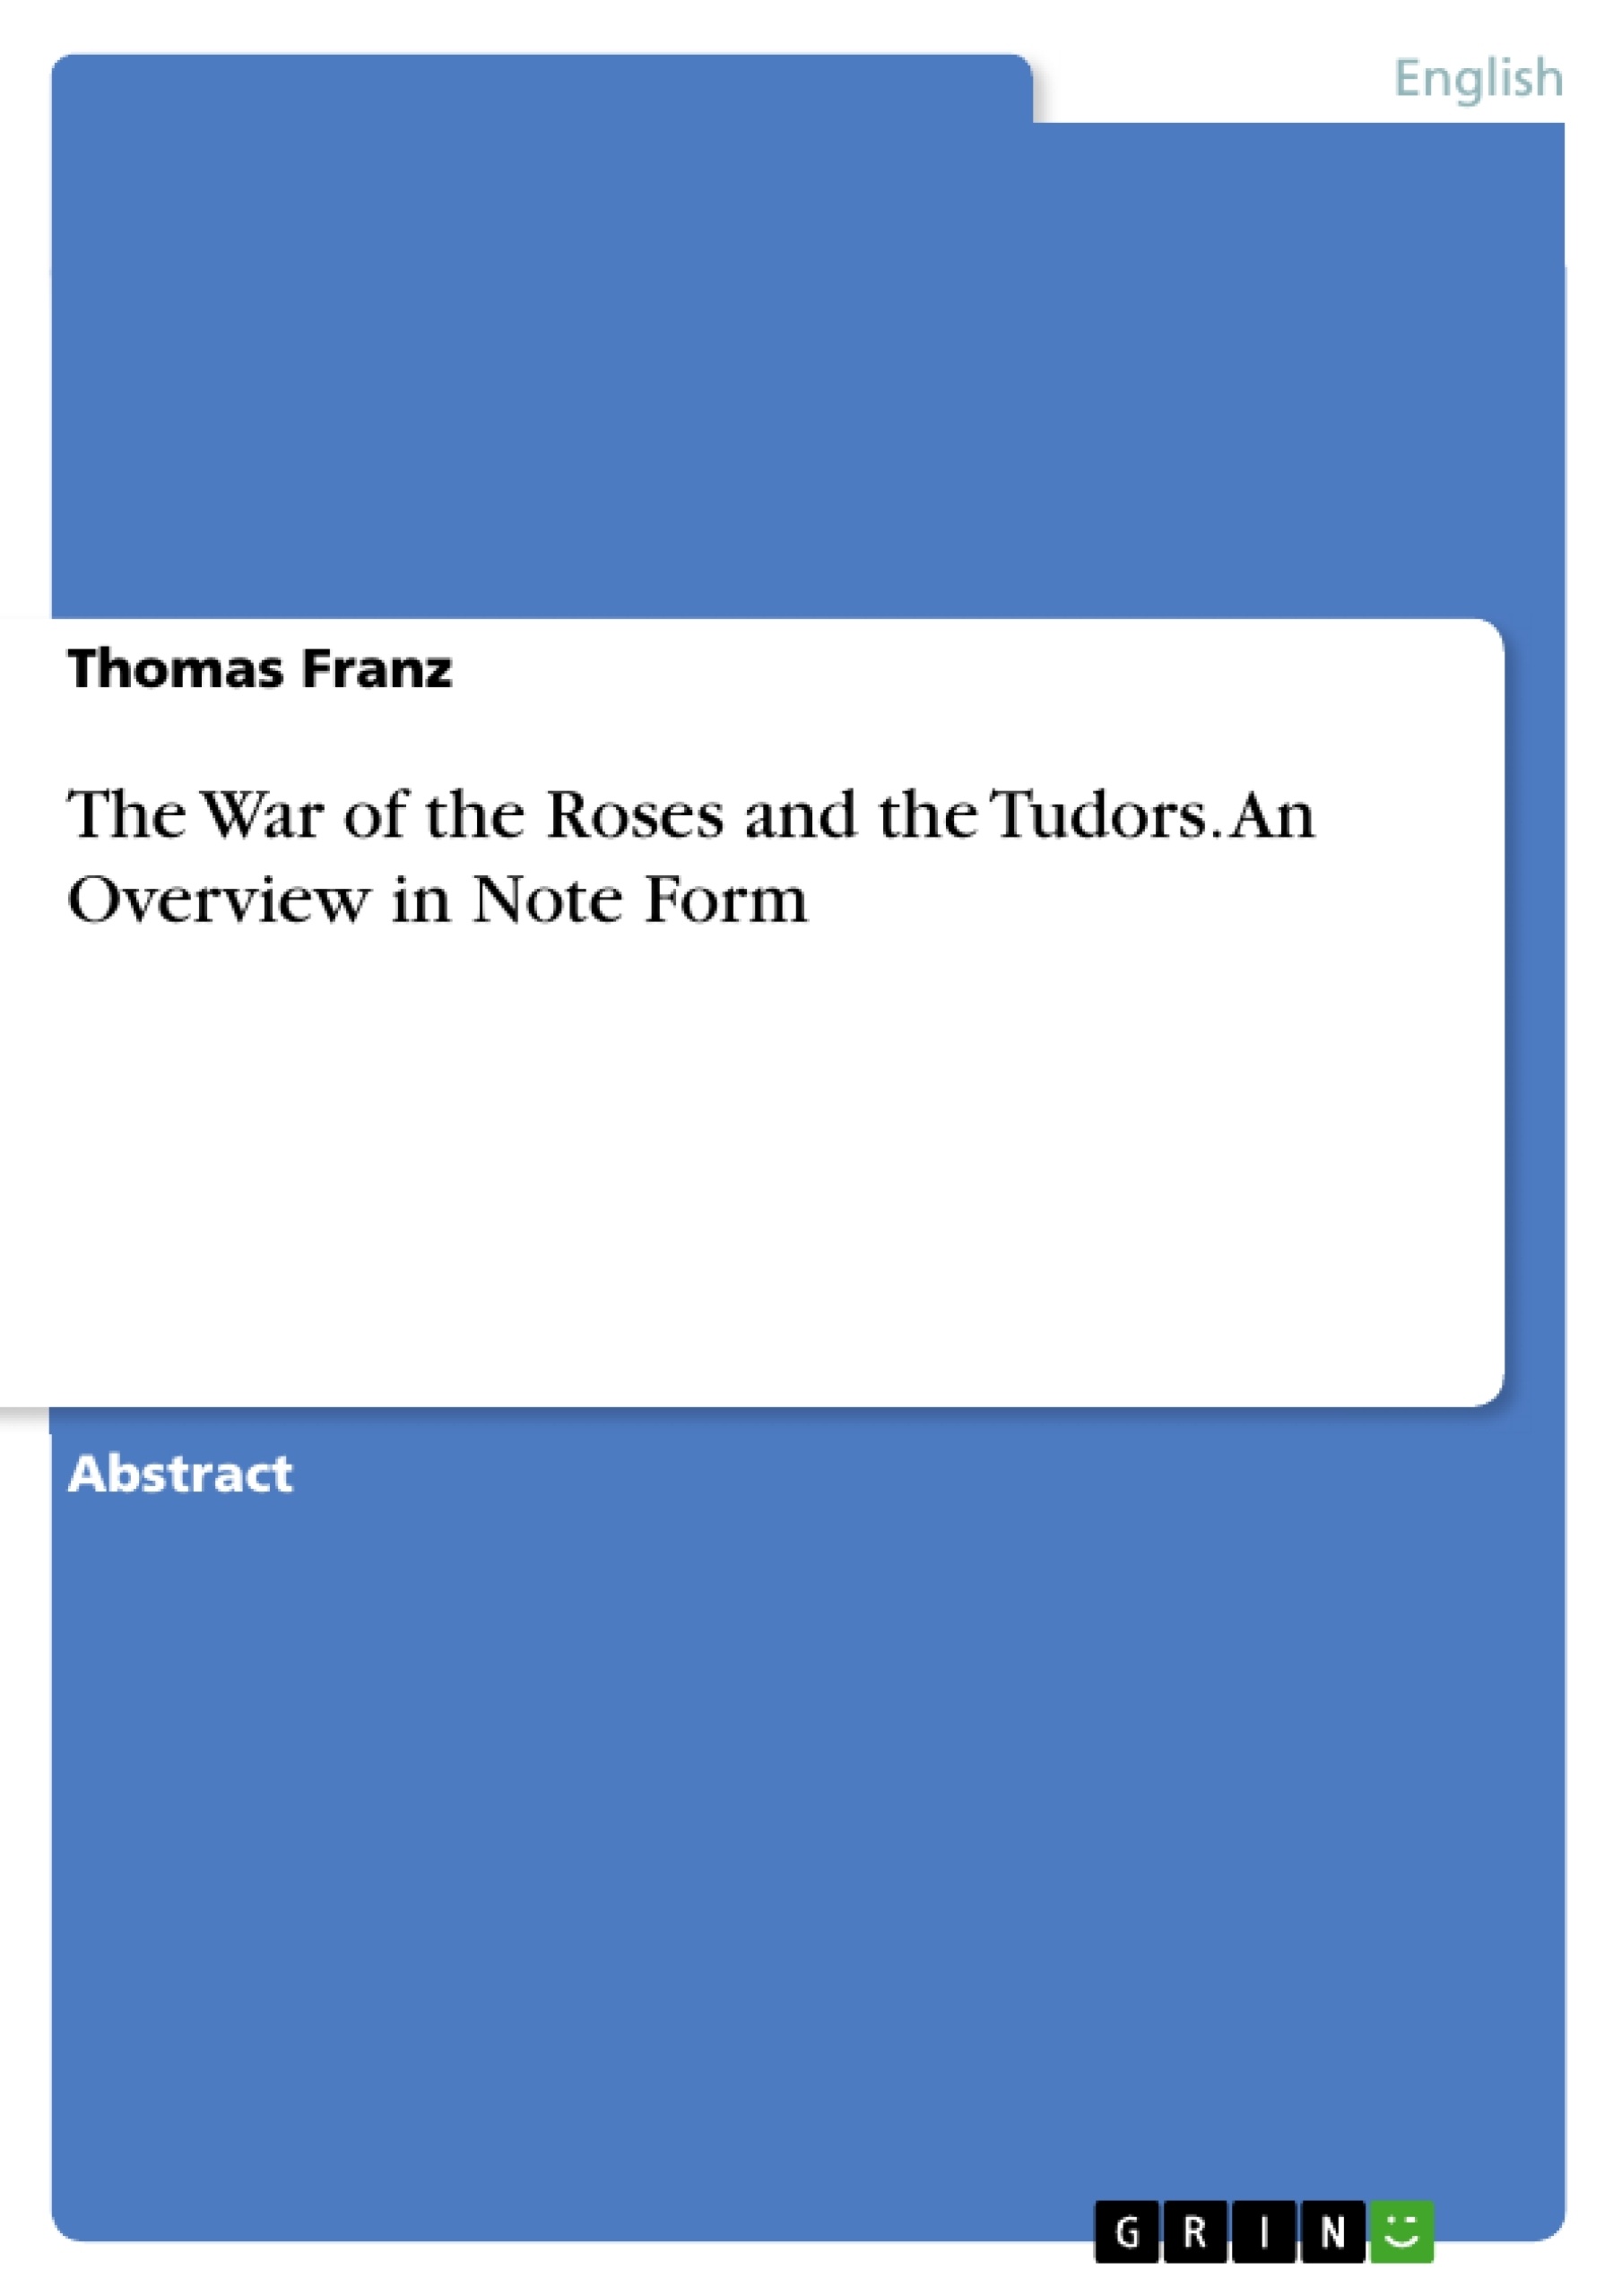 Título: The War of the Roses and the Tudors. An Overview in Note Form